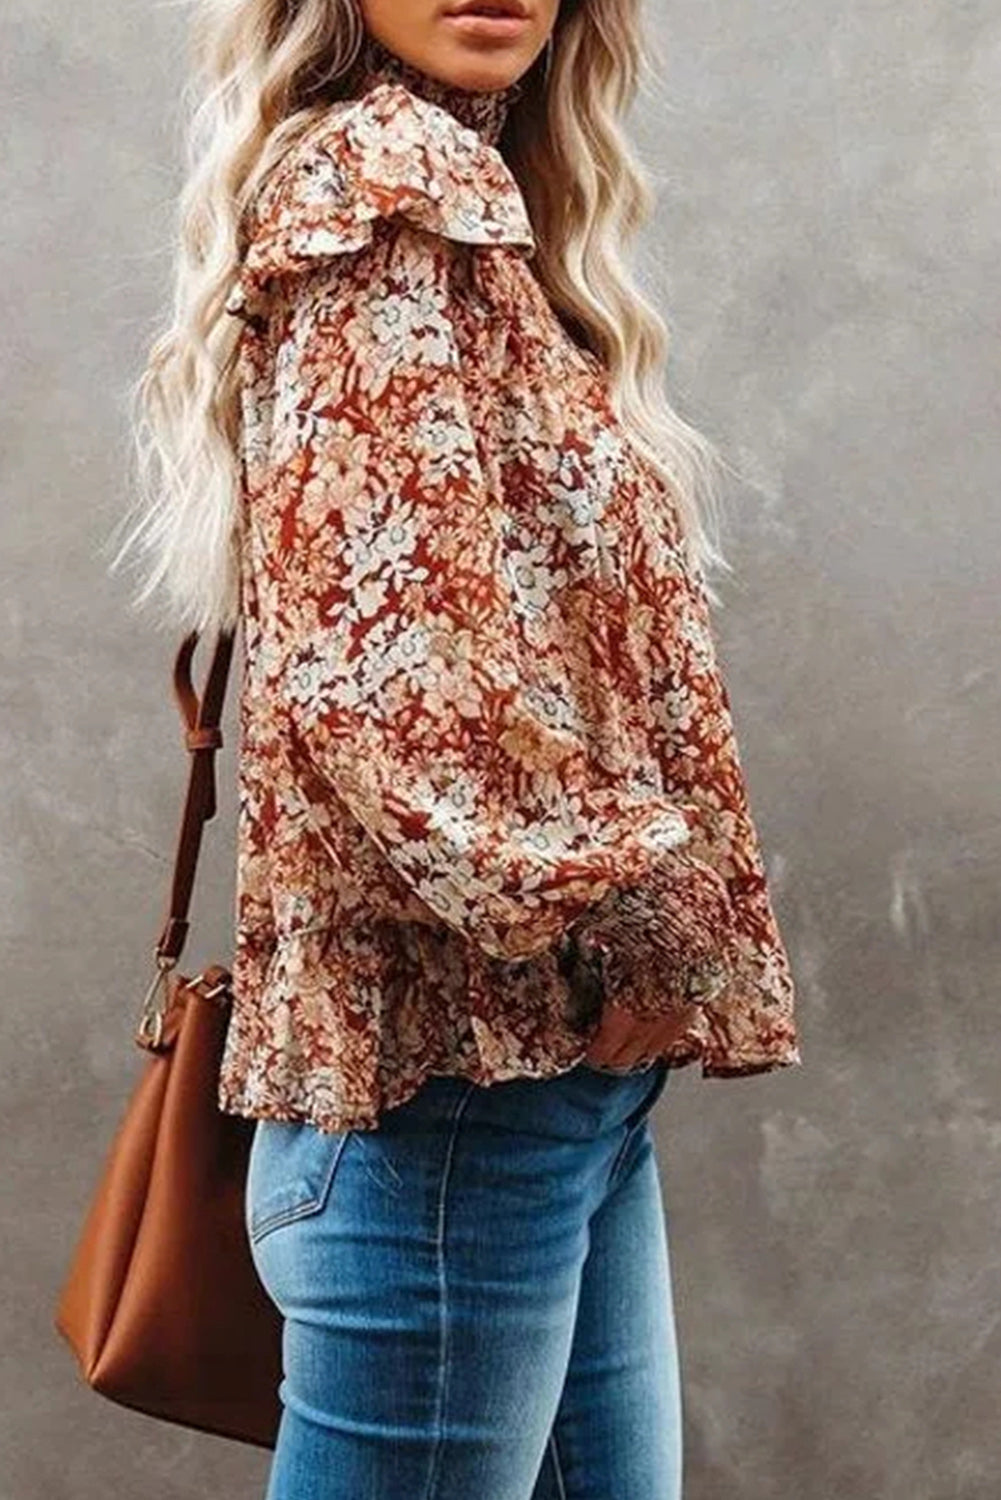 Floral Smoked High Neck Ruffled Blouse